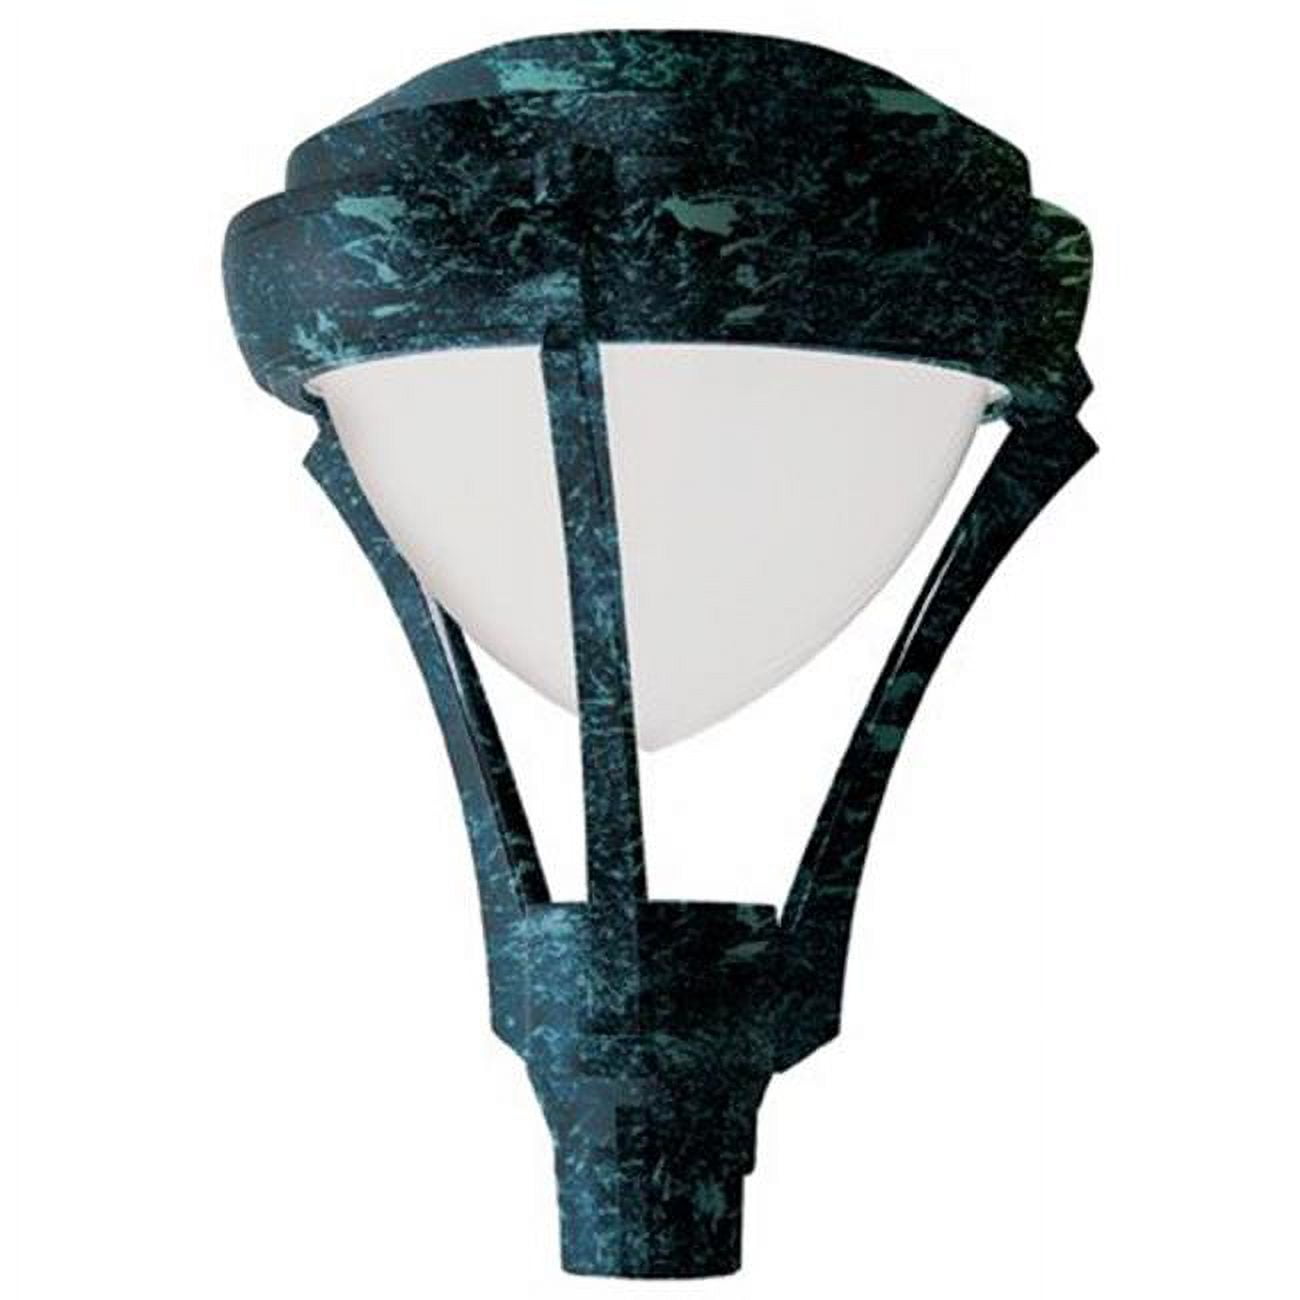 Picture of Dabmar Lighting GM598-VG 120W 120V Powder Coated Cast Aluminum Post Top Light Fixture with Metal Halide Lamp, Verde Green